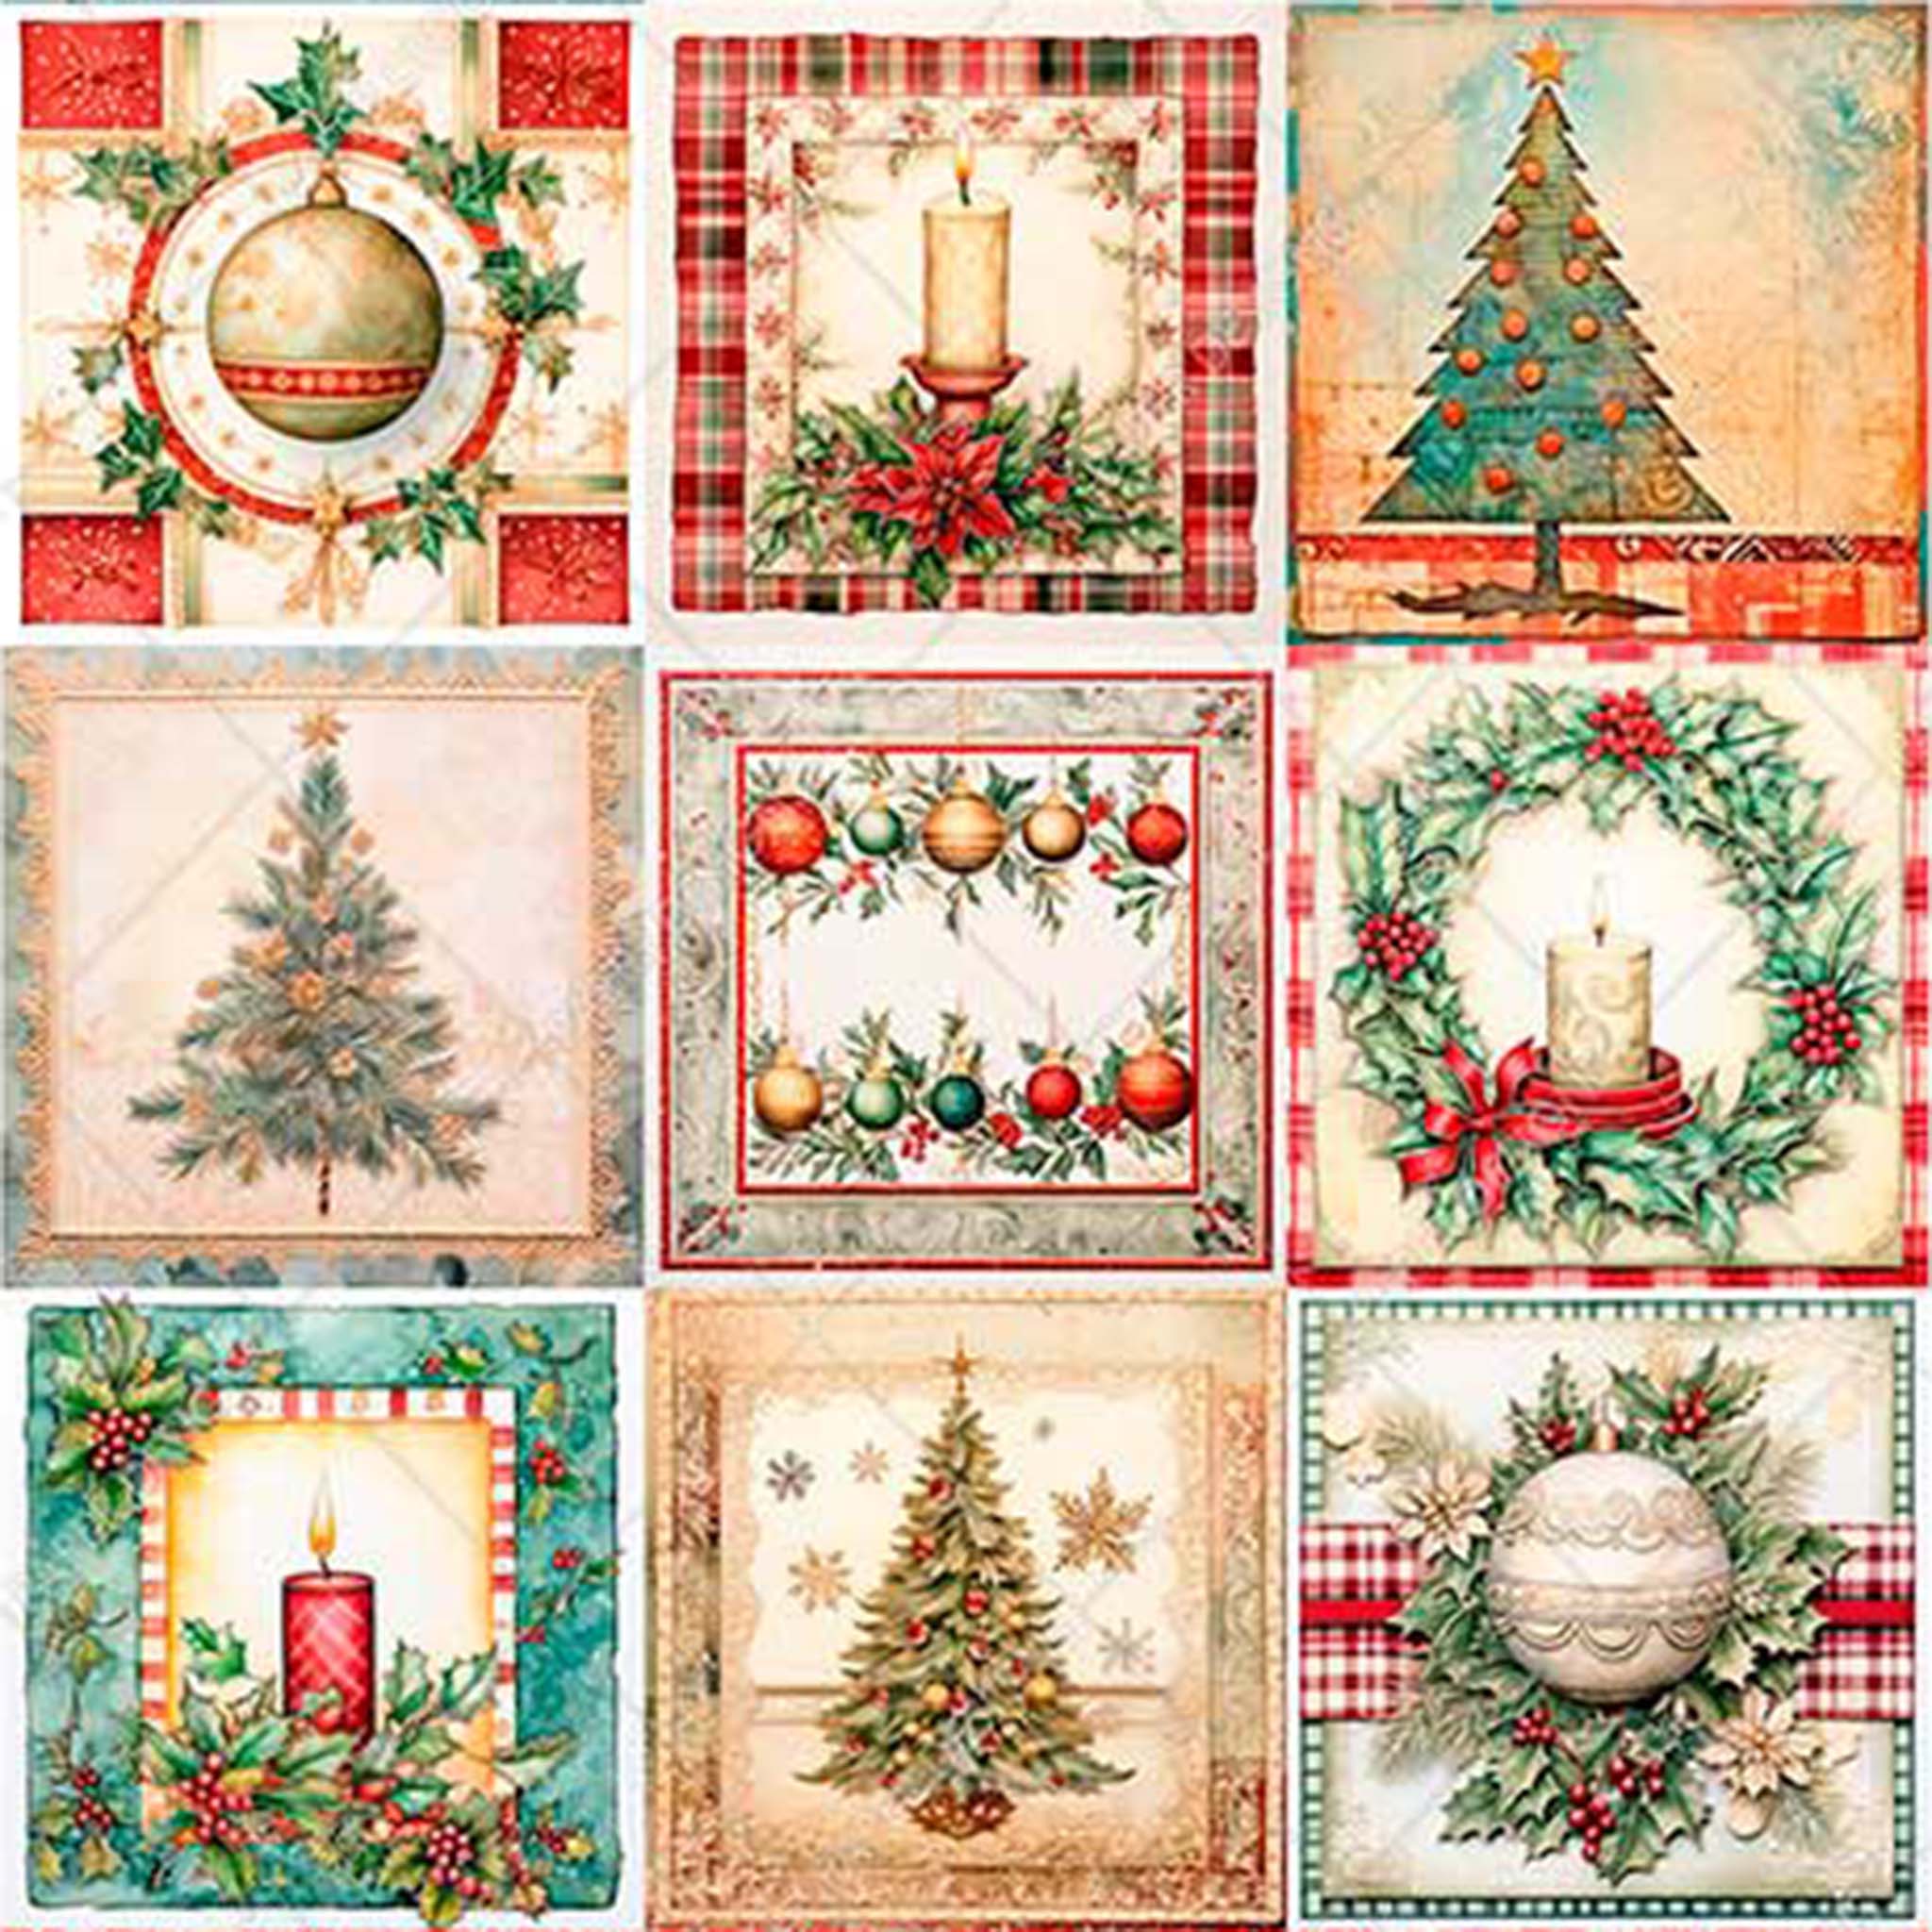 A3 rice paper design that features 12 unique miniature Christmas scenes, from Christmas Trees to ornaments to wreaths.